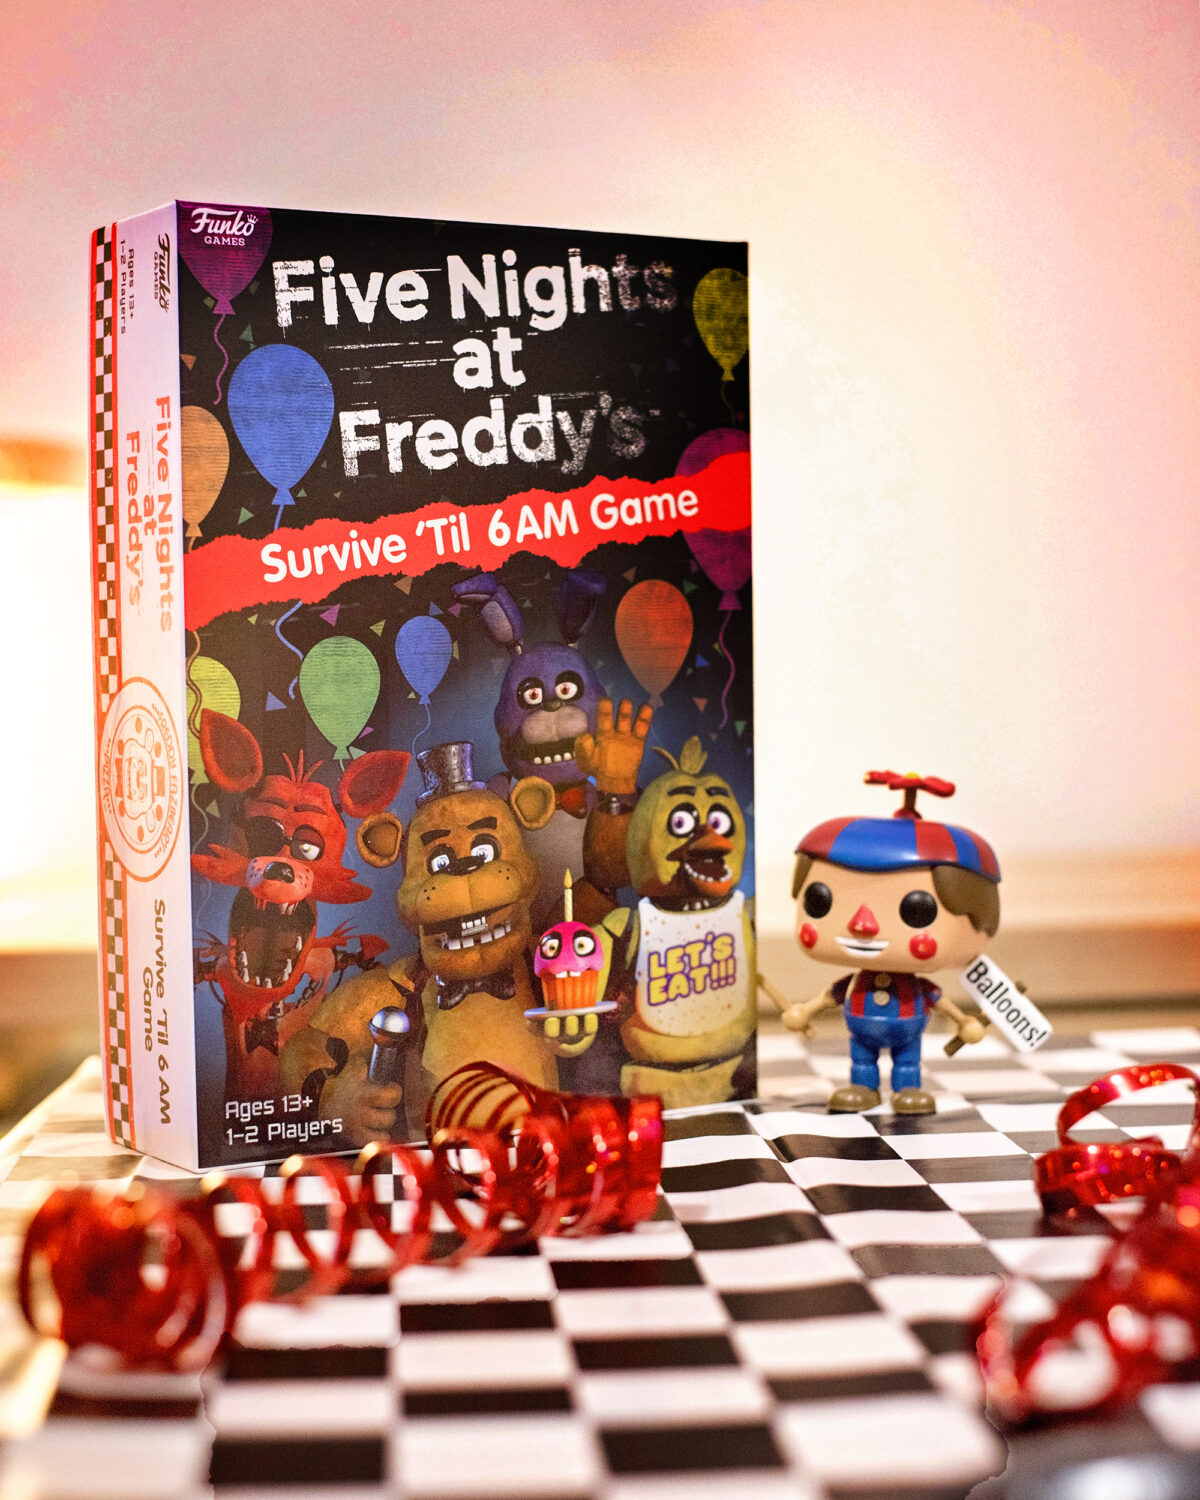 Image shows the Five Nights at Freddy's Survive 'til 6AM game on a table covered with a black and white checkered tablecloth, strewn with red metallic streamers and with a Funko Pop Vinyl figure of Balloon boy from FNAF stood next to the box. Image by keep up with the jones family.